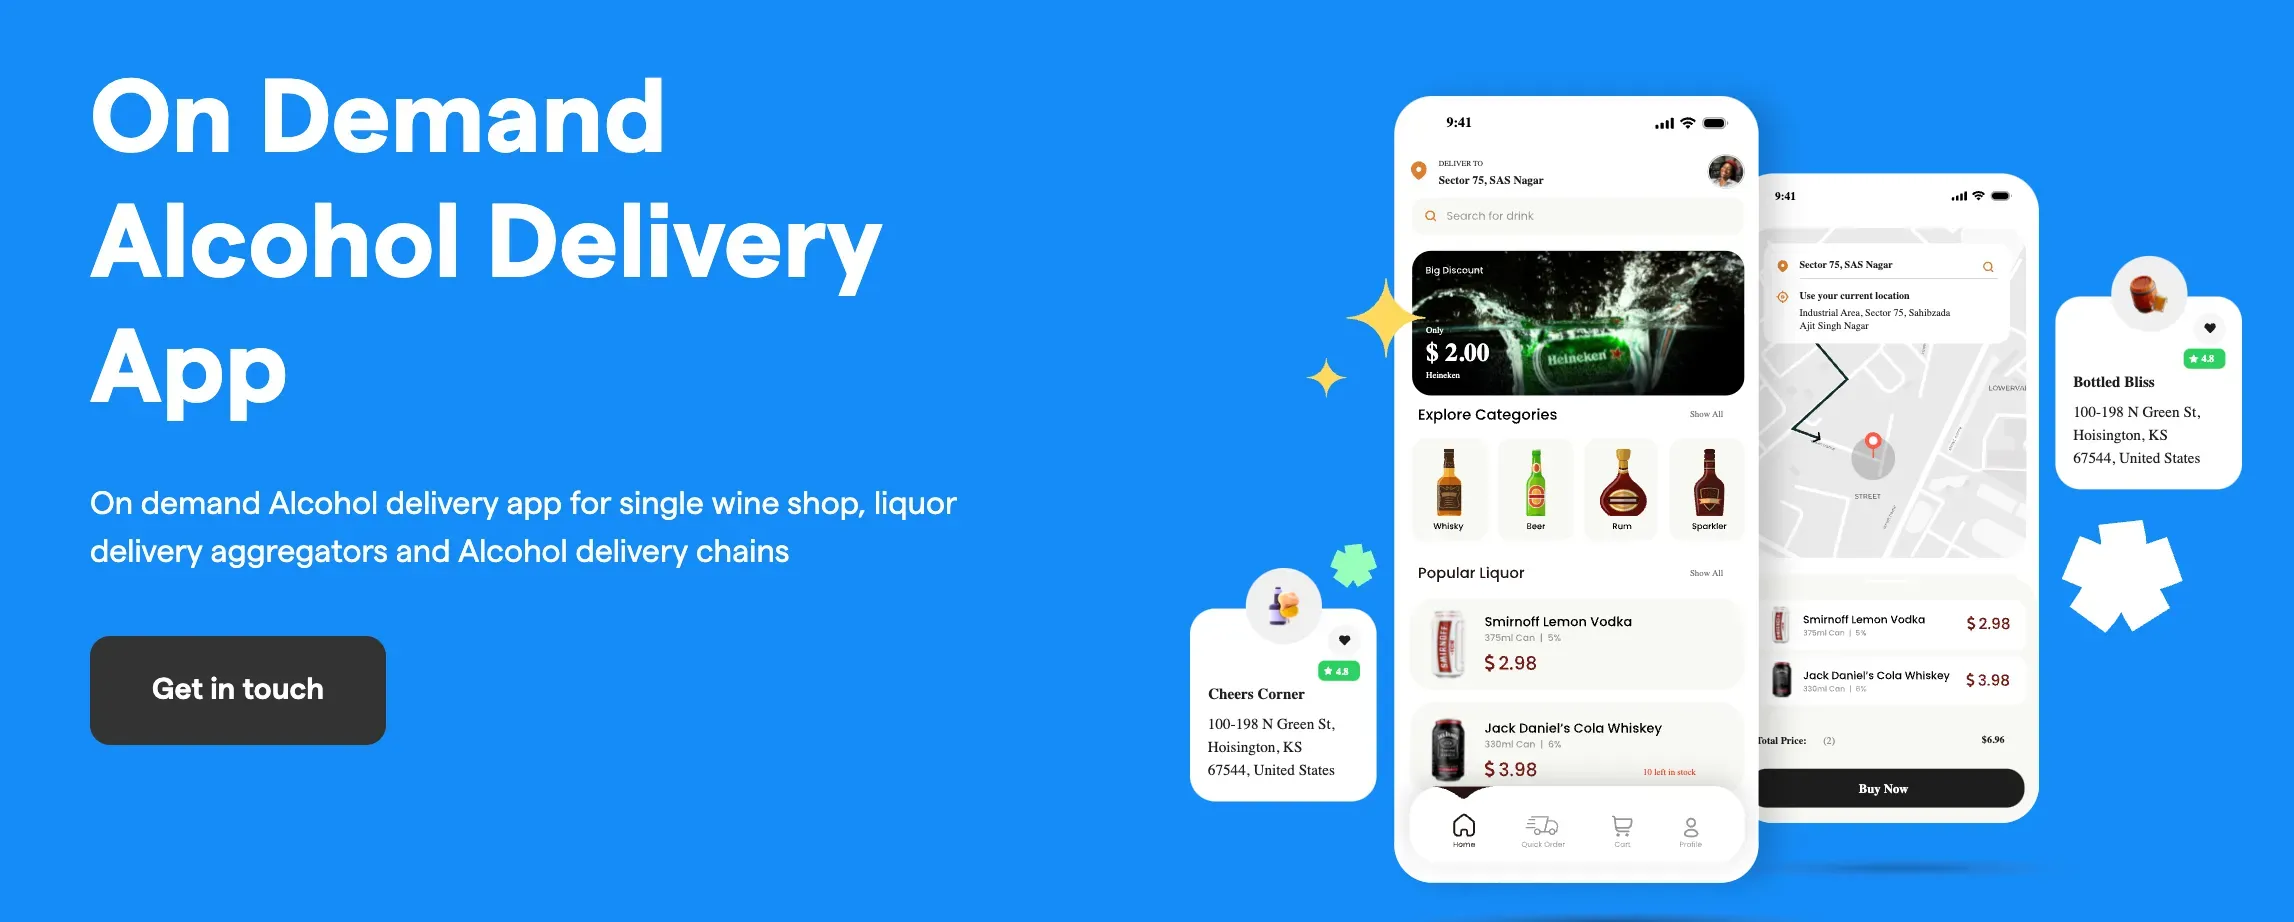 Alcohol delivery App